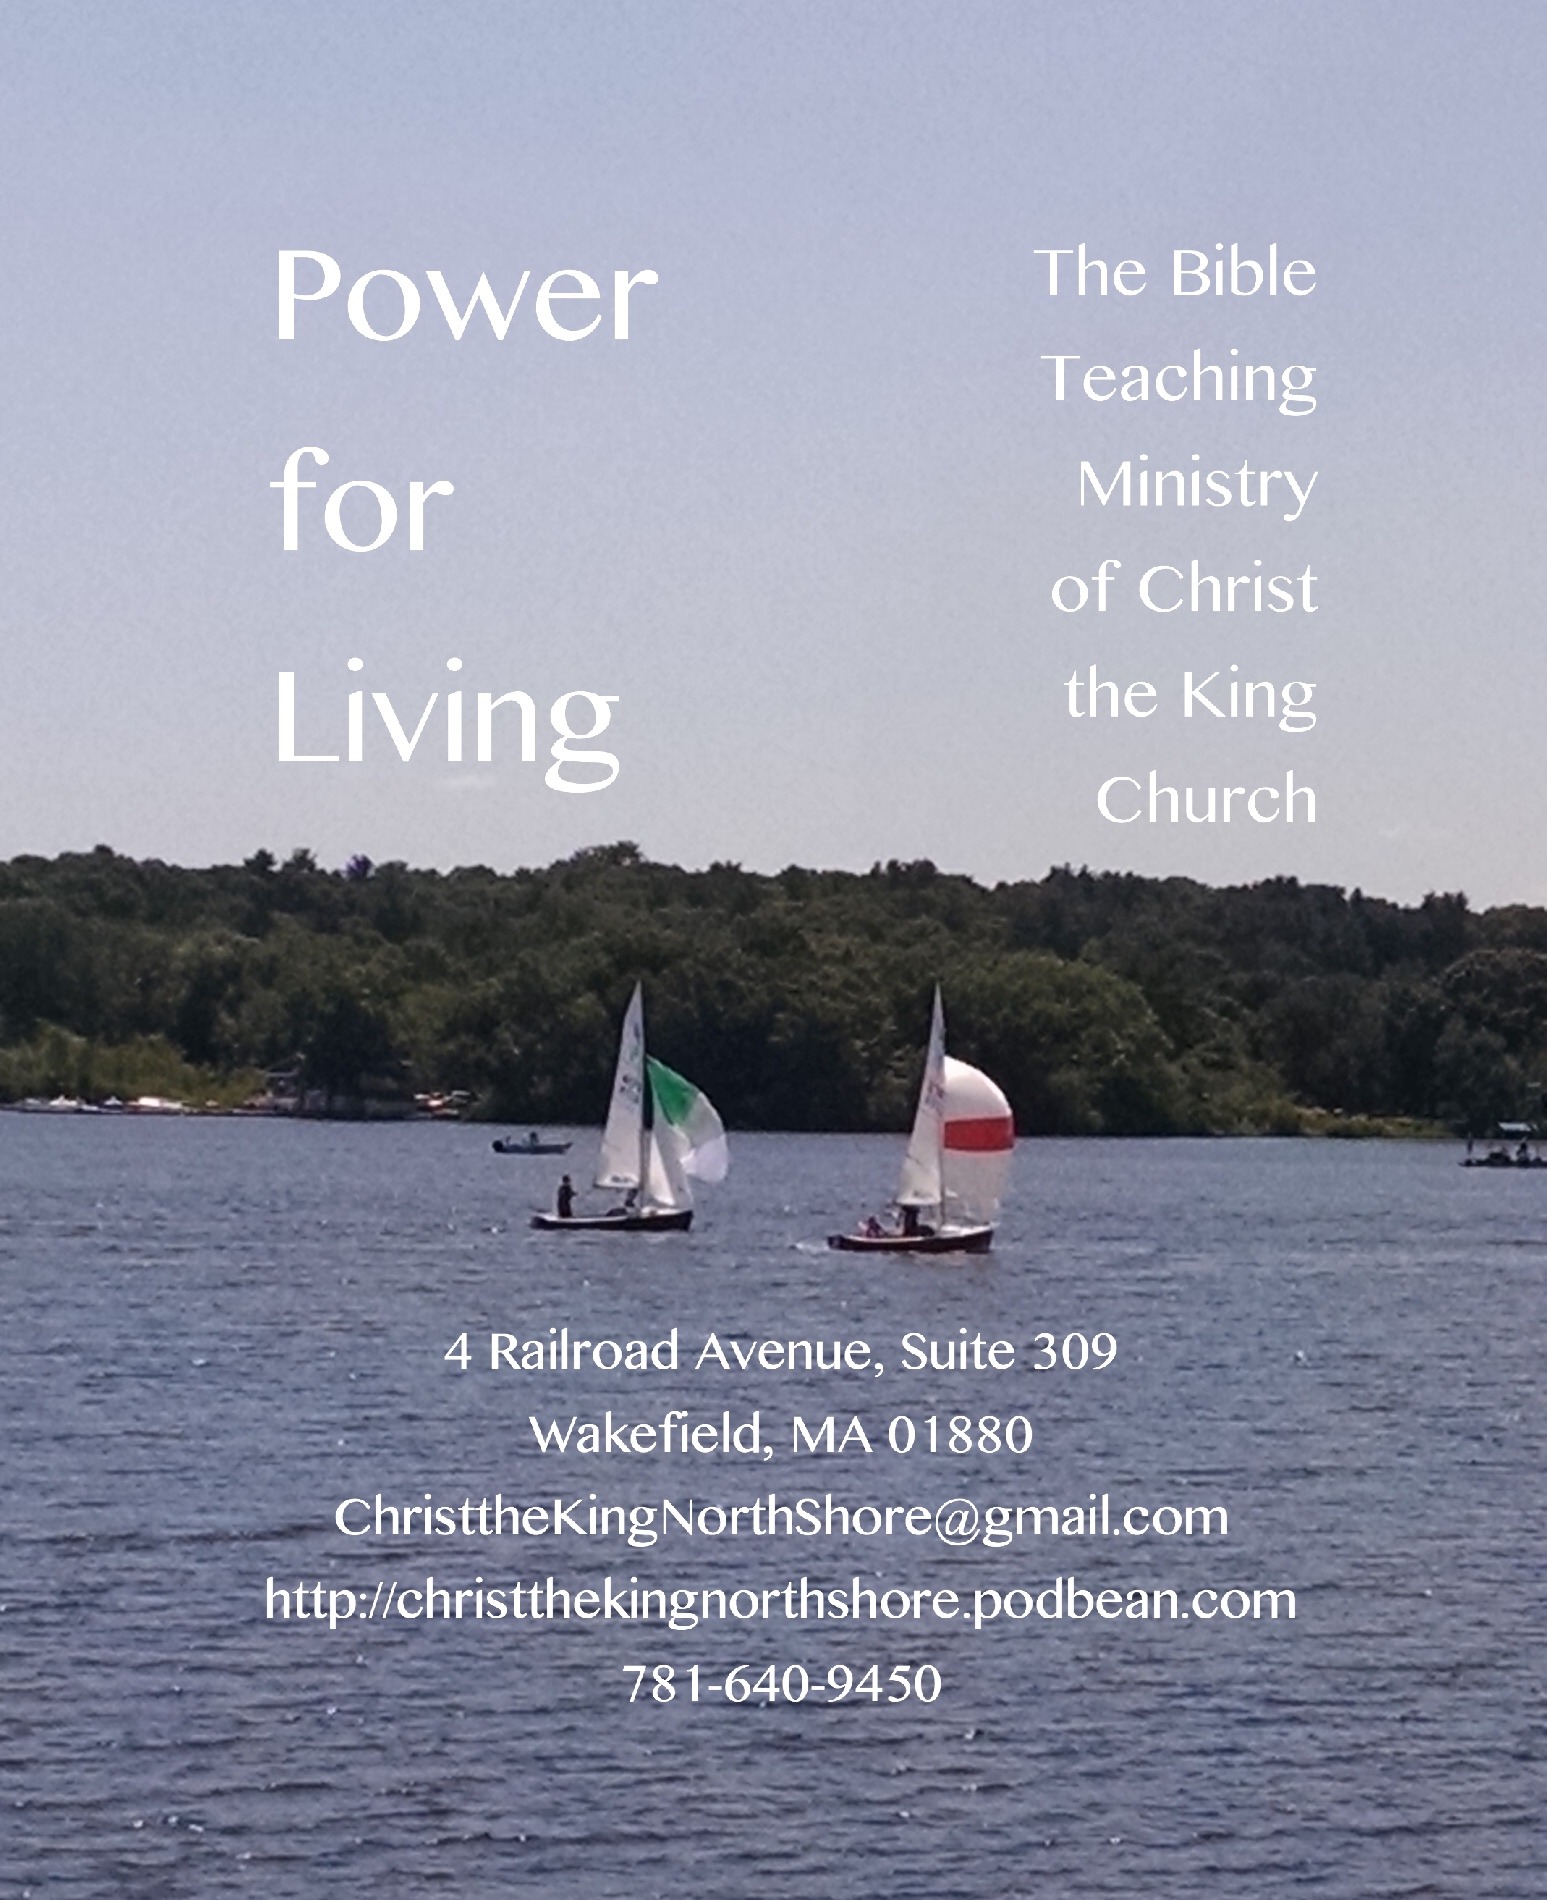 Power for Living, Episode 160403, Jesus' Purifying Look